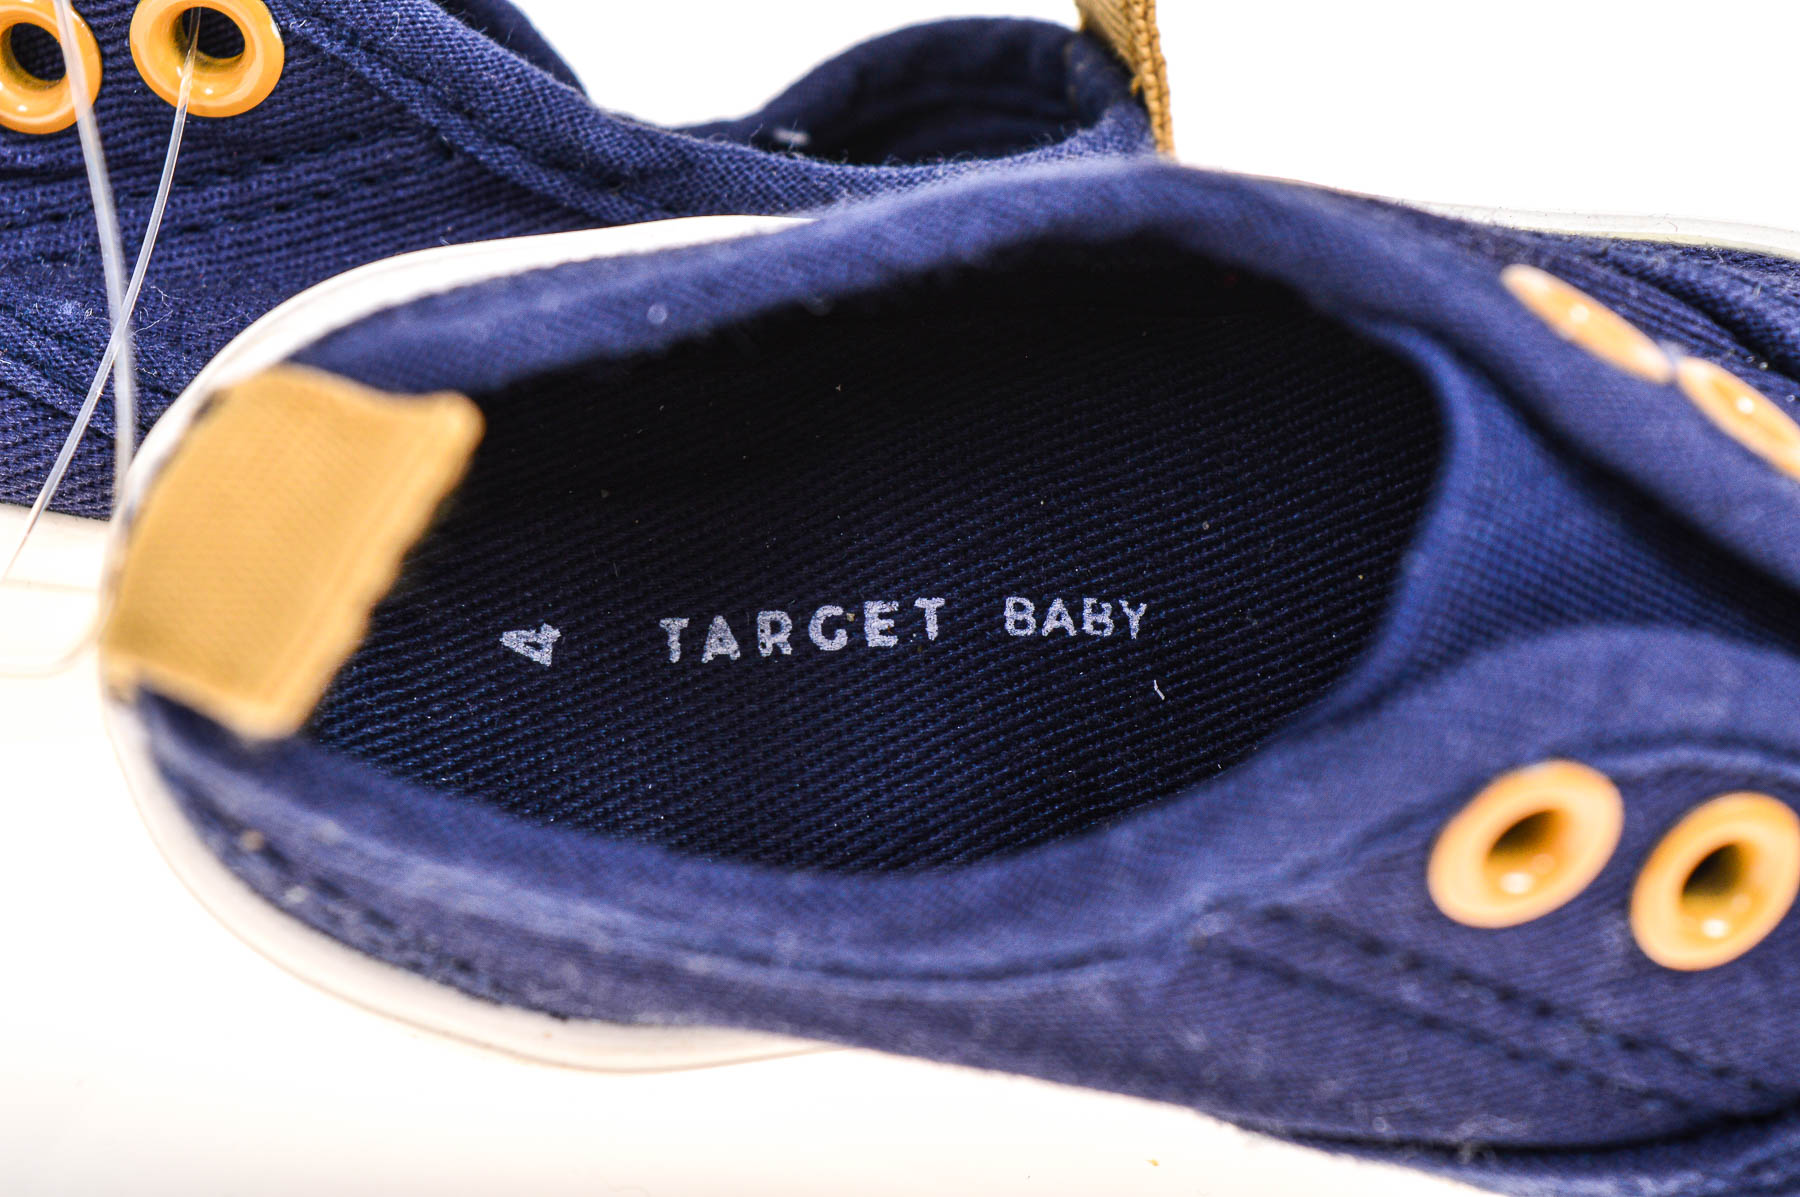 Baby boys' shoes - Target BABY - 4